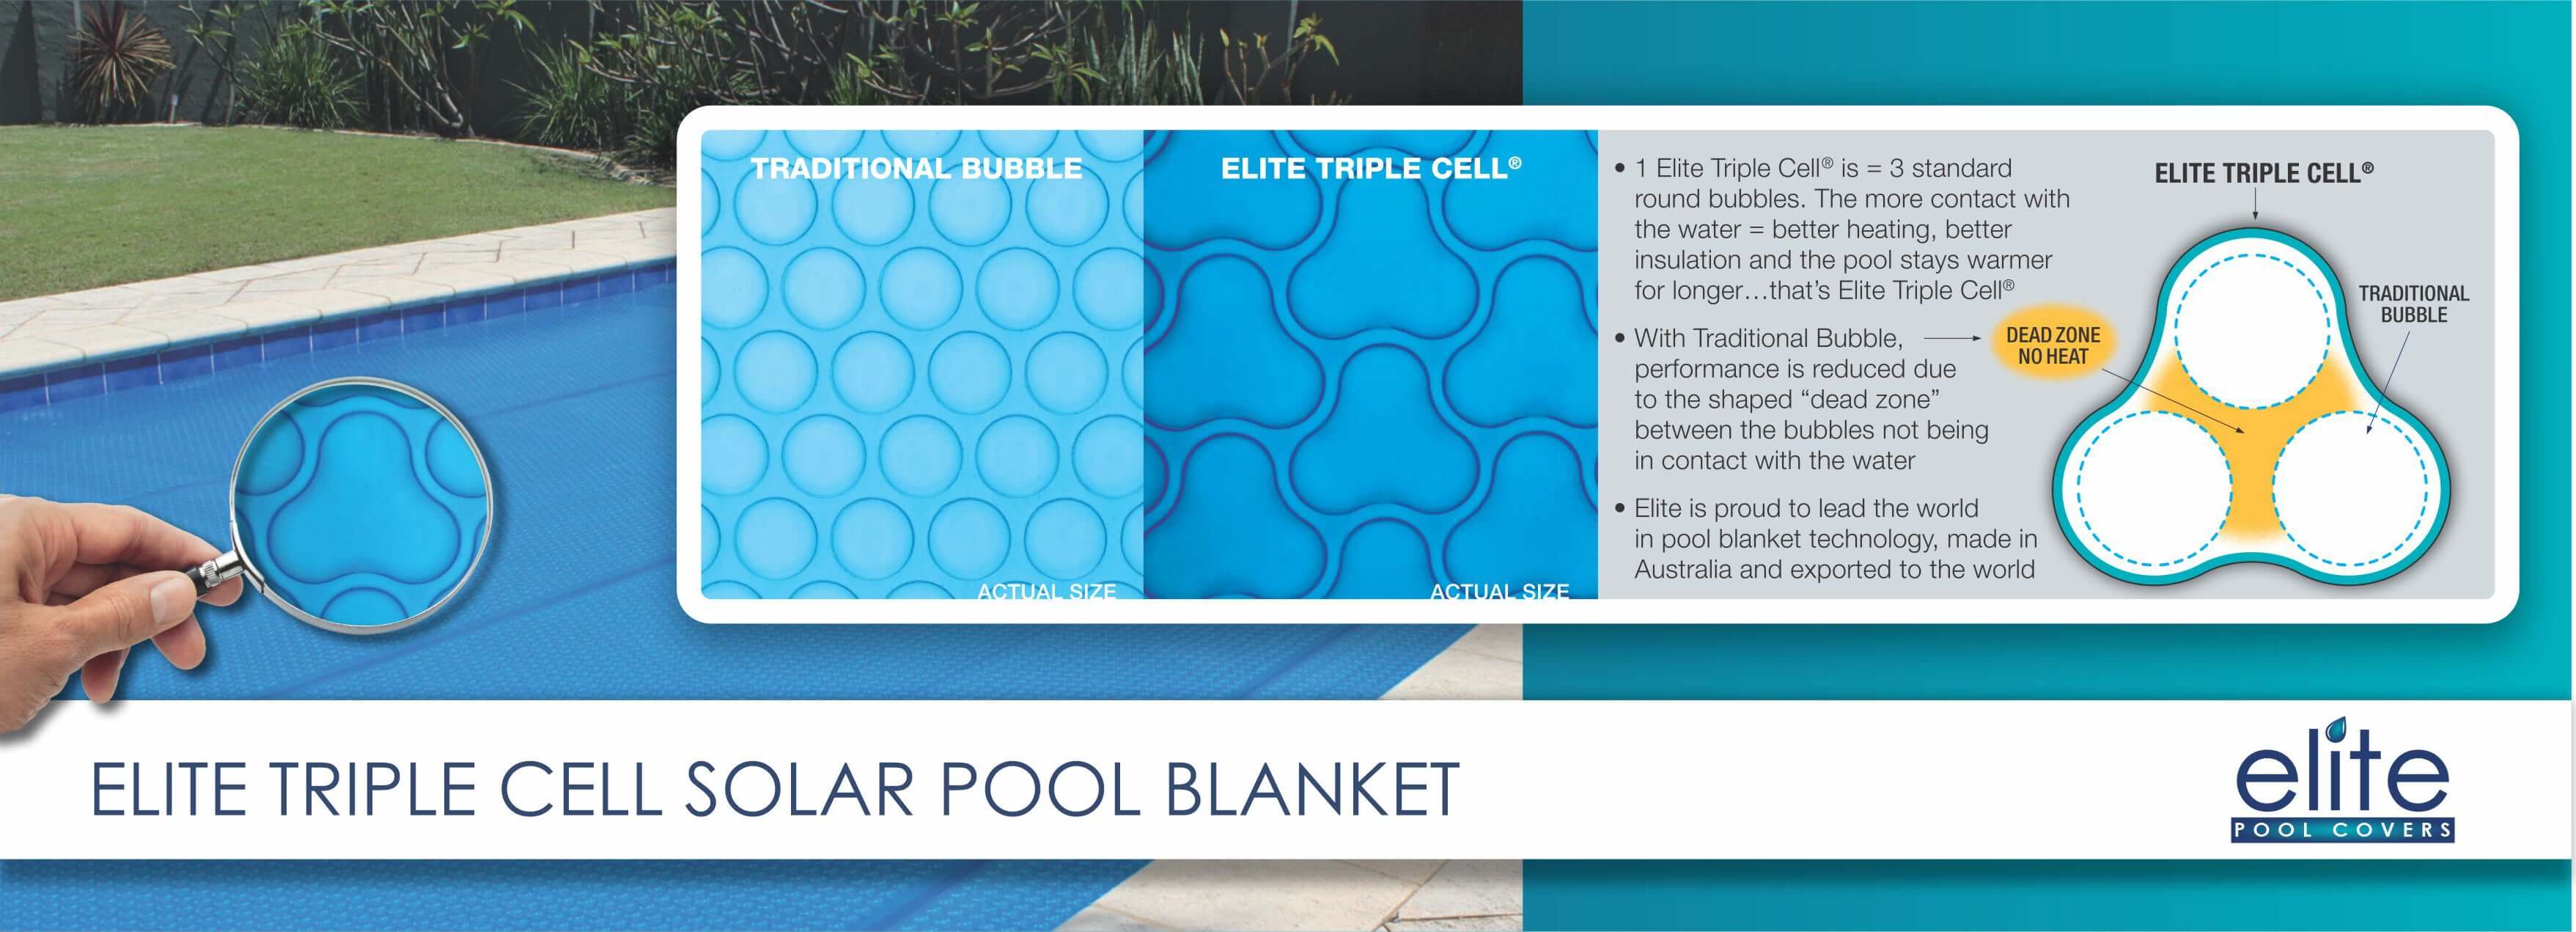 slideshow image showing Elite Triple Cell solar pool cover